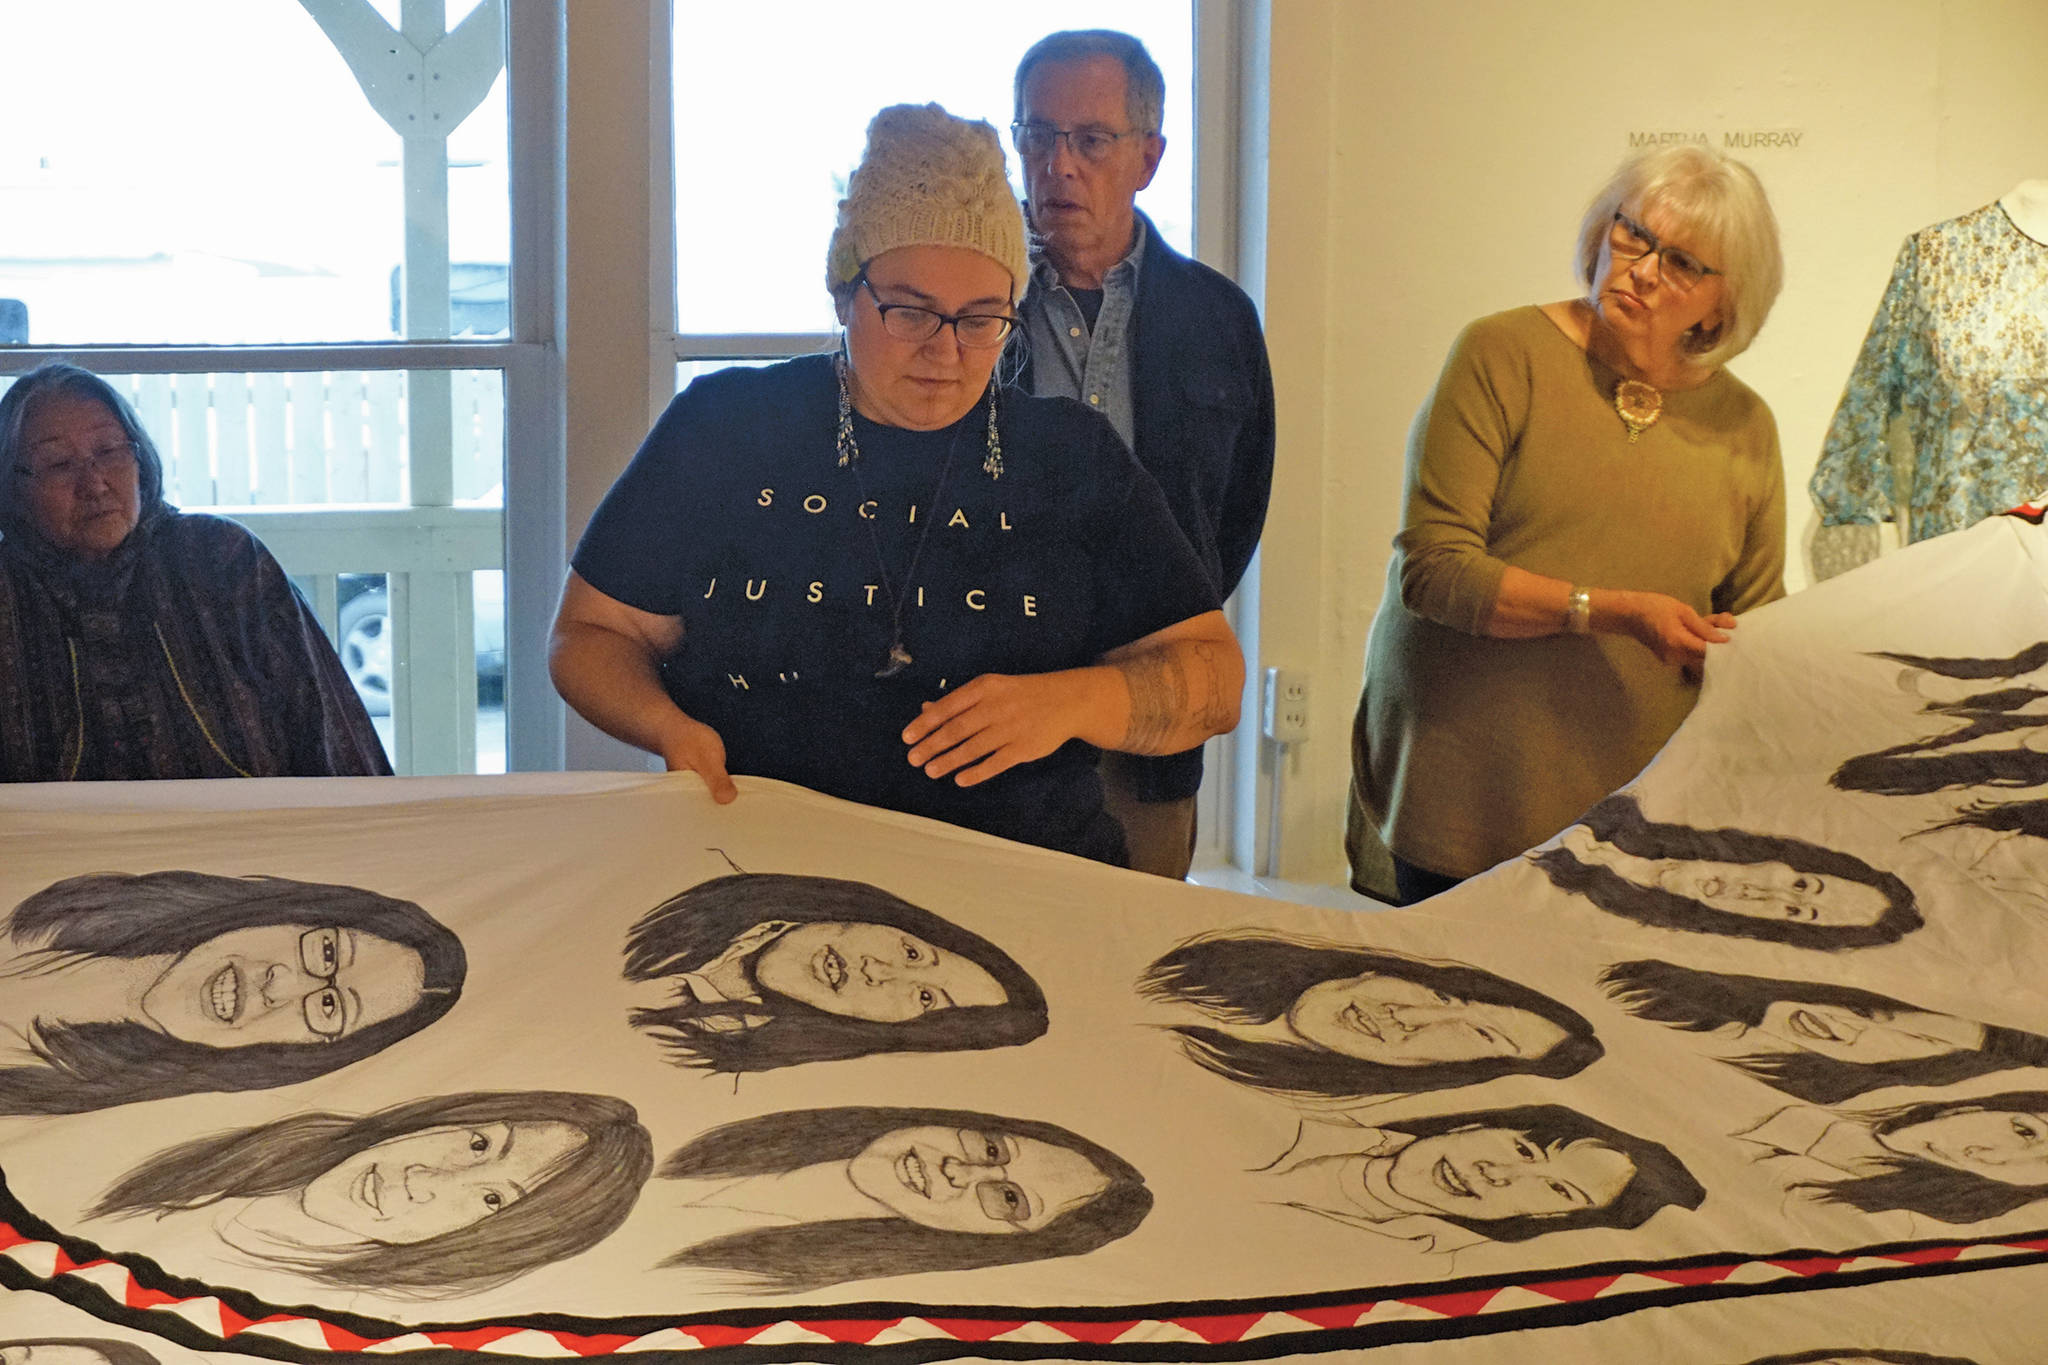 Amber Webb, center, discusses her kuspuk at the opening of the “Kuspuk/Qaspeq/Atikluk” show on Oct. 5, 2019, at Bunnell Street Arts Center in Homer, Alaska. The kuspuk shows faces of missing or murdered indigenous women. (Photo by Michael Armstrong/Homer News)